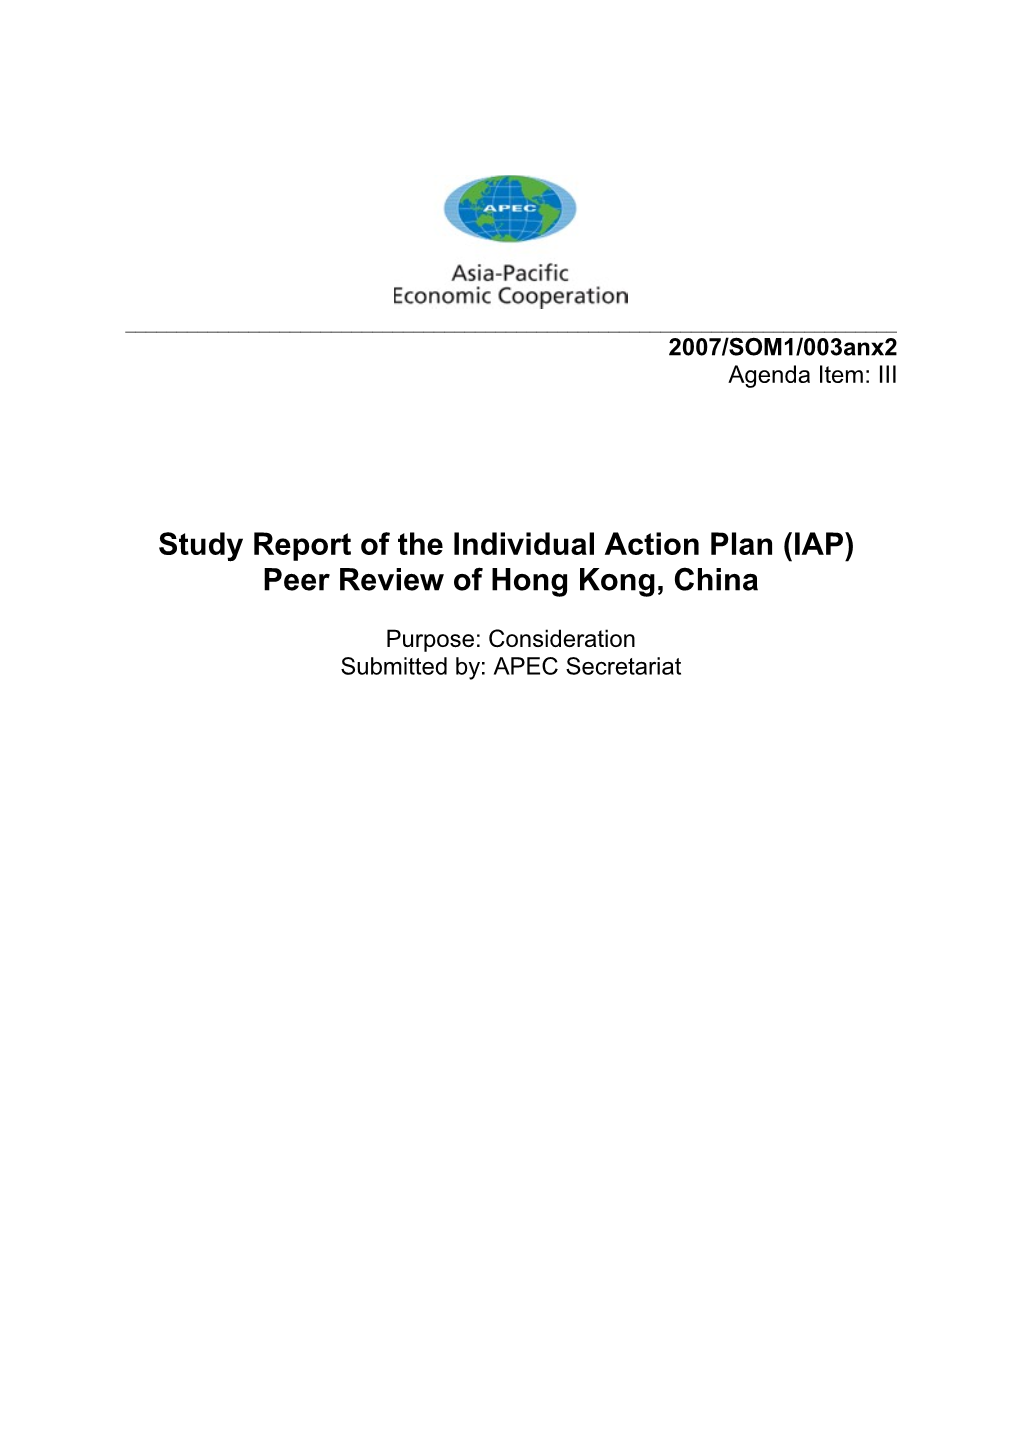 Study Report of the Individual Action Plan (IAP)